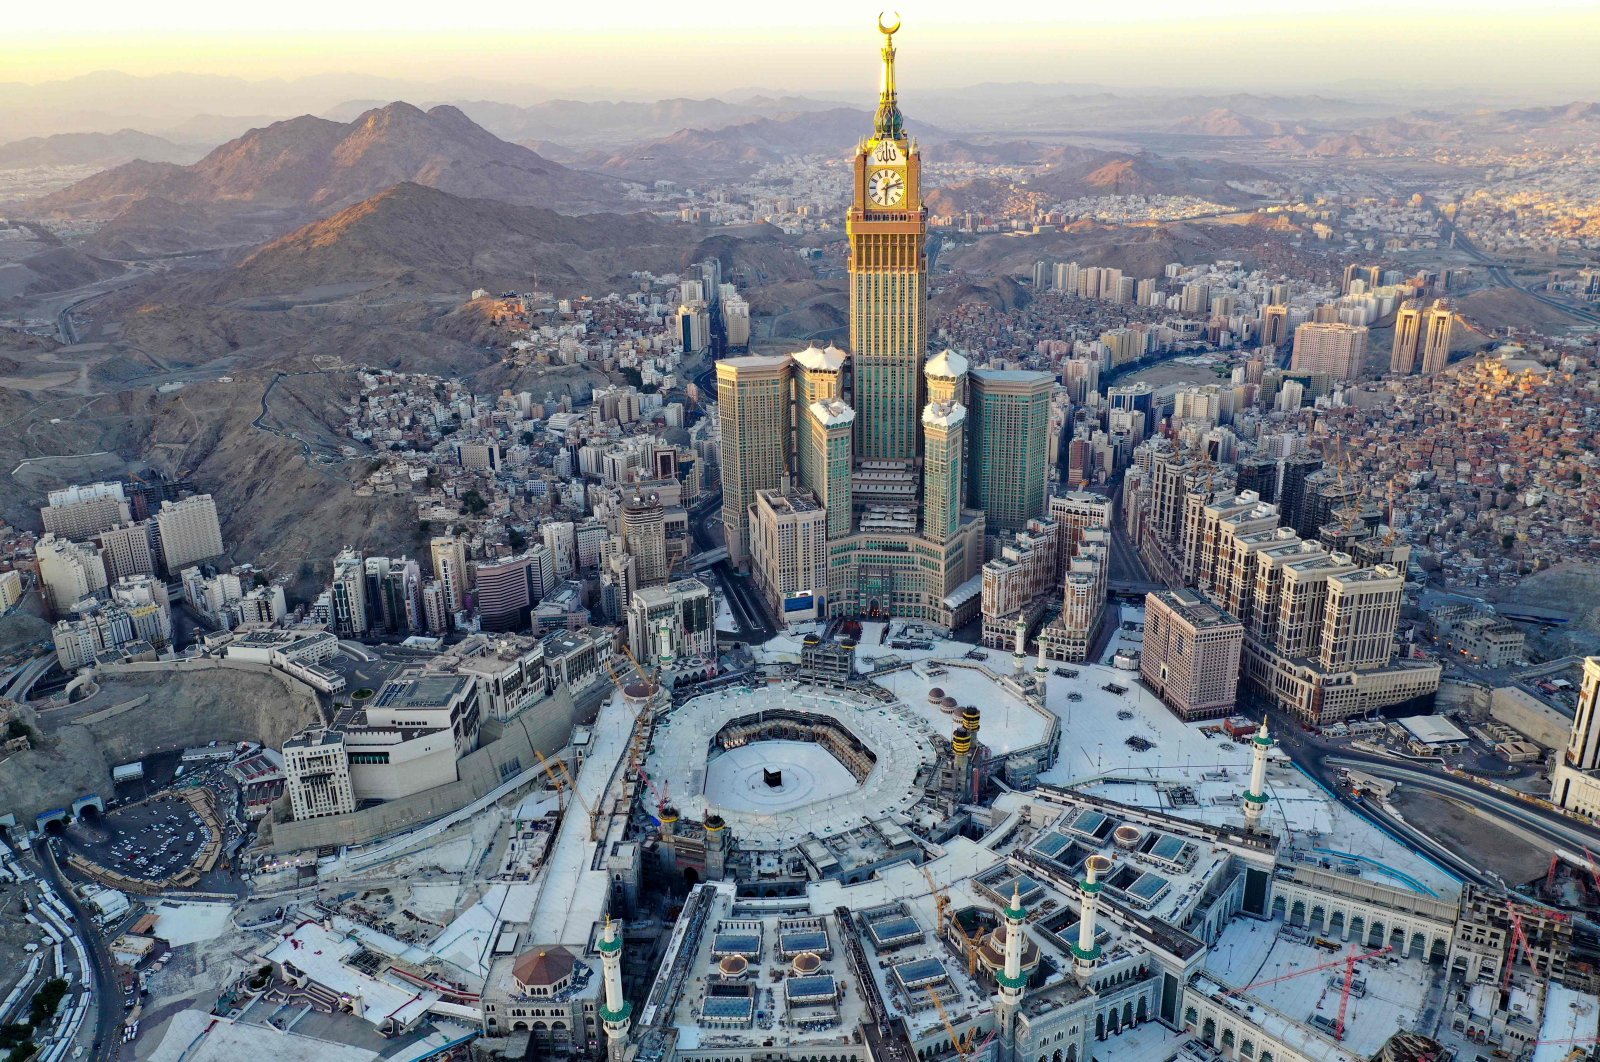 An aerial view shows the Great Mosque and the Mecca Tower, deserted on the first day of the Muslim fasting month of Ramadan, in the Saudi holy city of Mecca, April 24, 2020. (AFP Photo)